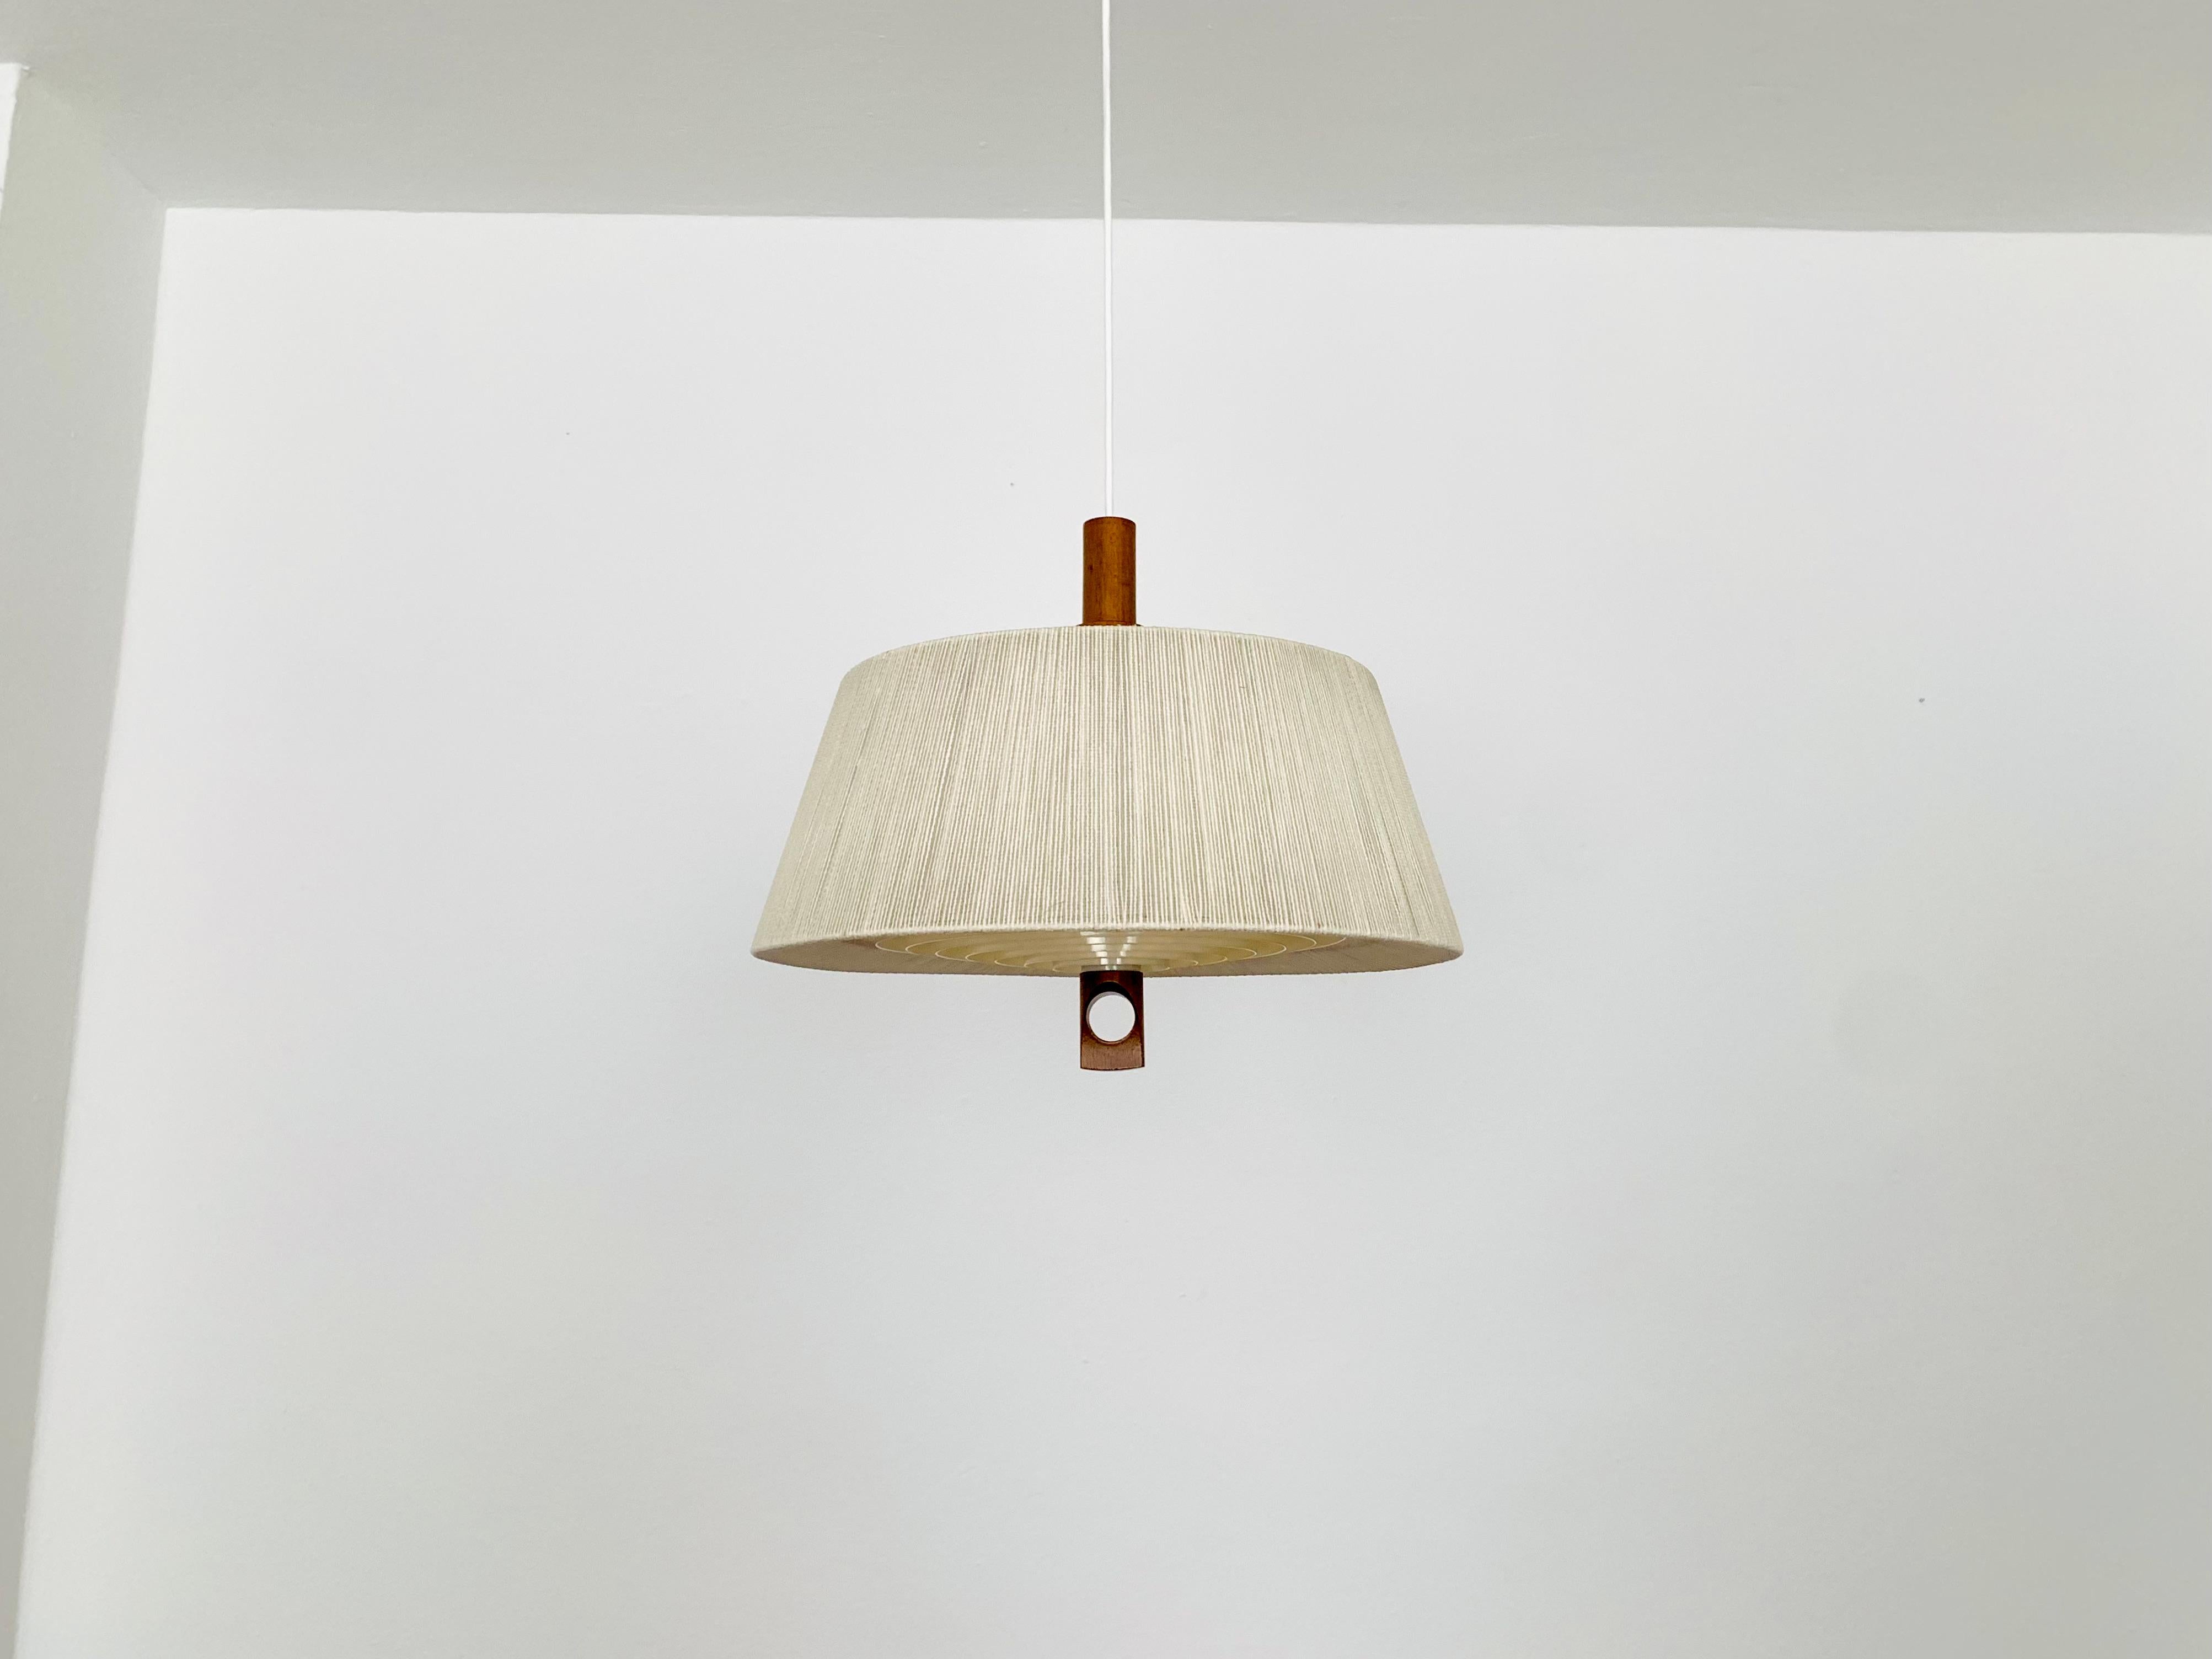 Exceptionally beautiful pendant light from the 1960s.
The design is very unusual.
The shape and the materials create a warm and very pleasant light.

Condition:

Very good vintage condition with slight signs of wear consistent with age.
The raffia